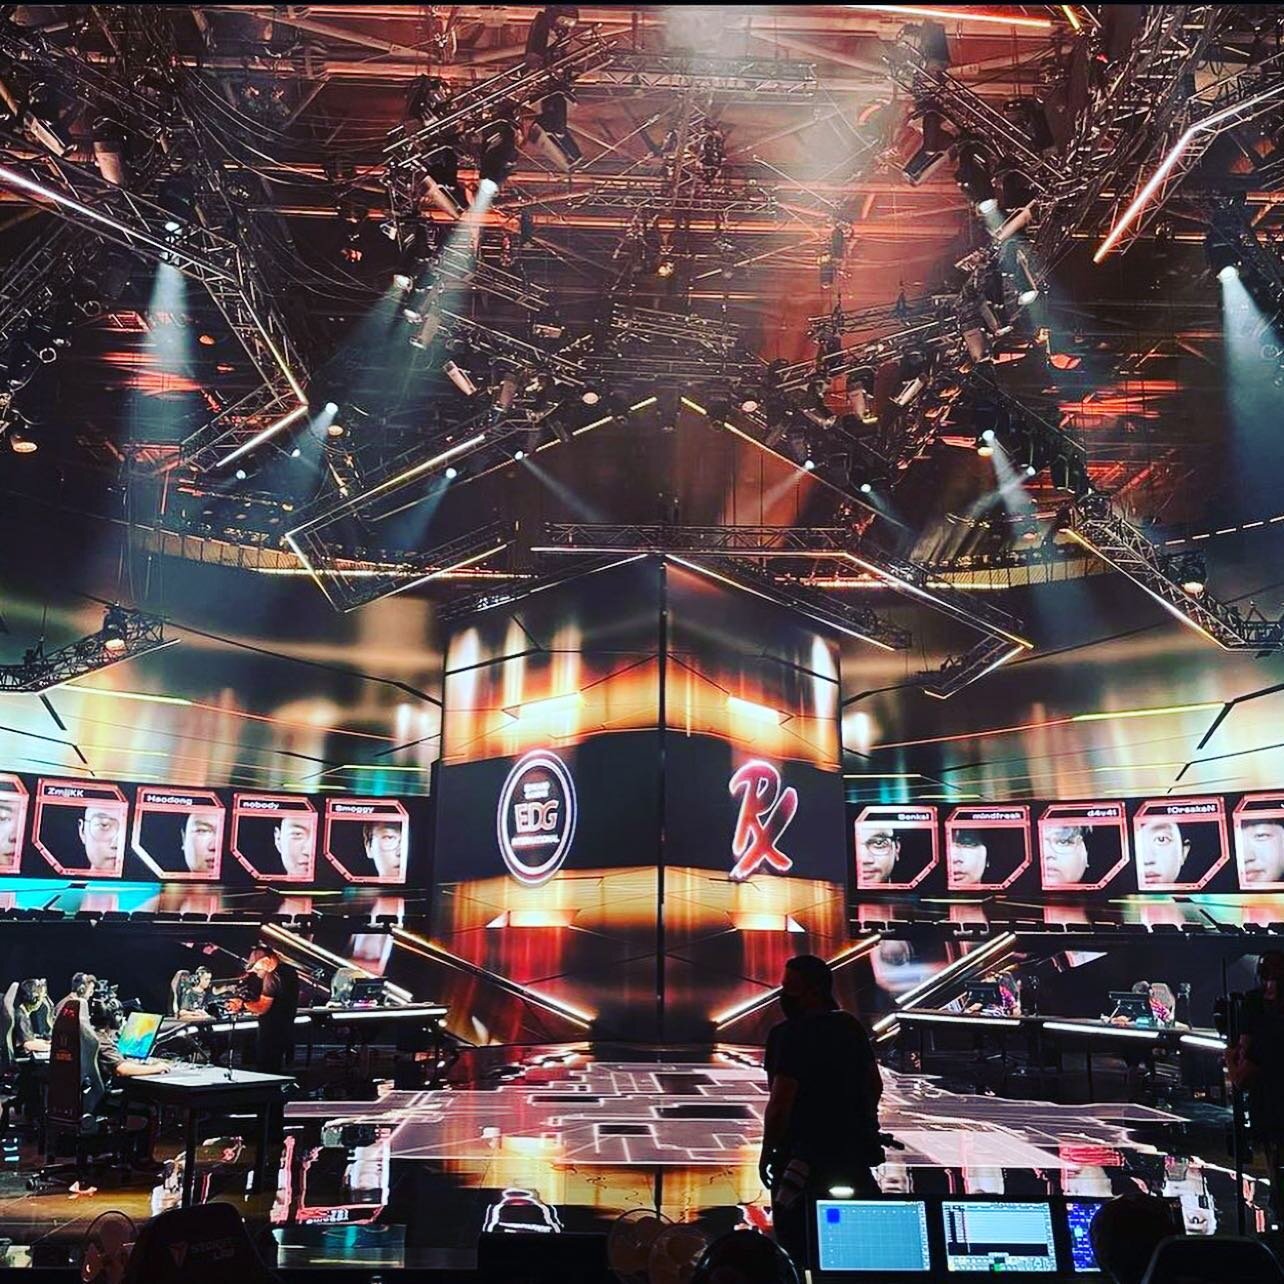 Kicking things off for @riotgames @valorantesports Champions in Istanbul.  The team always bringing the A game!  Looking great out there!  #concominc #riotgames #valorantchampions

#thetotalproductioncompany #concom_inc #productioncompany #remoteprod